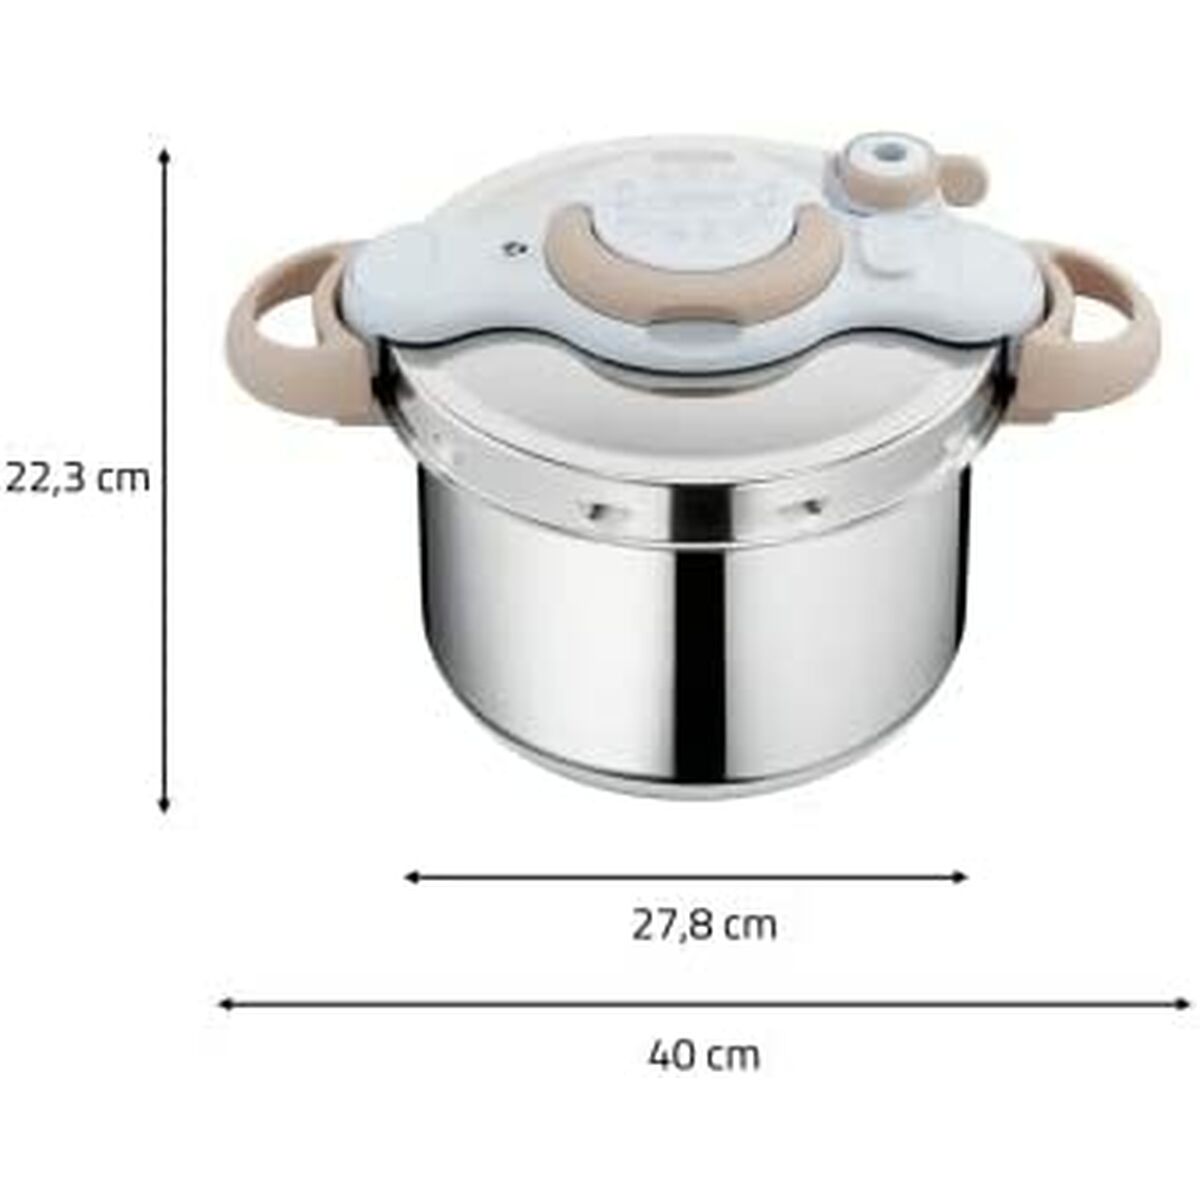 Pressure cooker SEB Clipso Minut Eco Respect Stainless steel